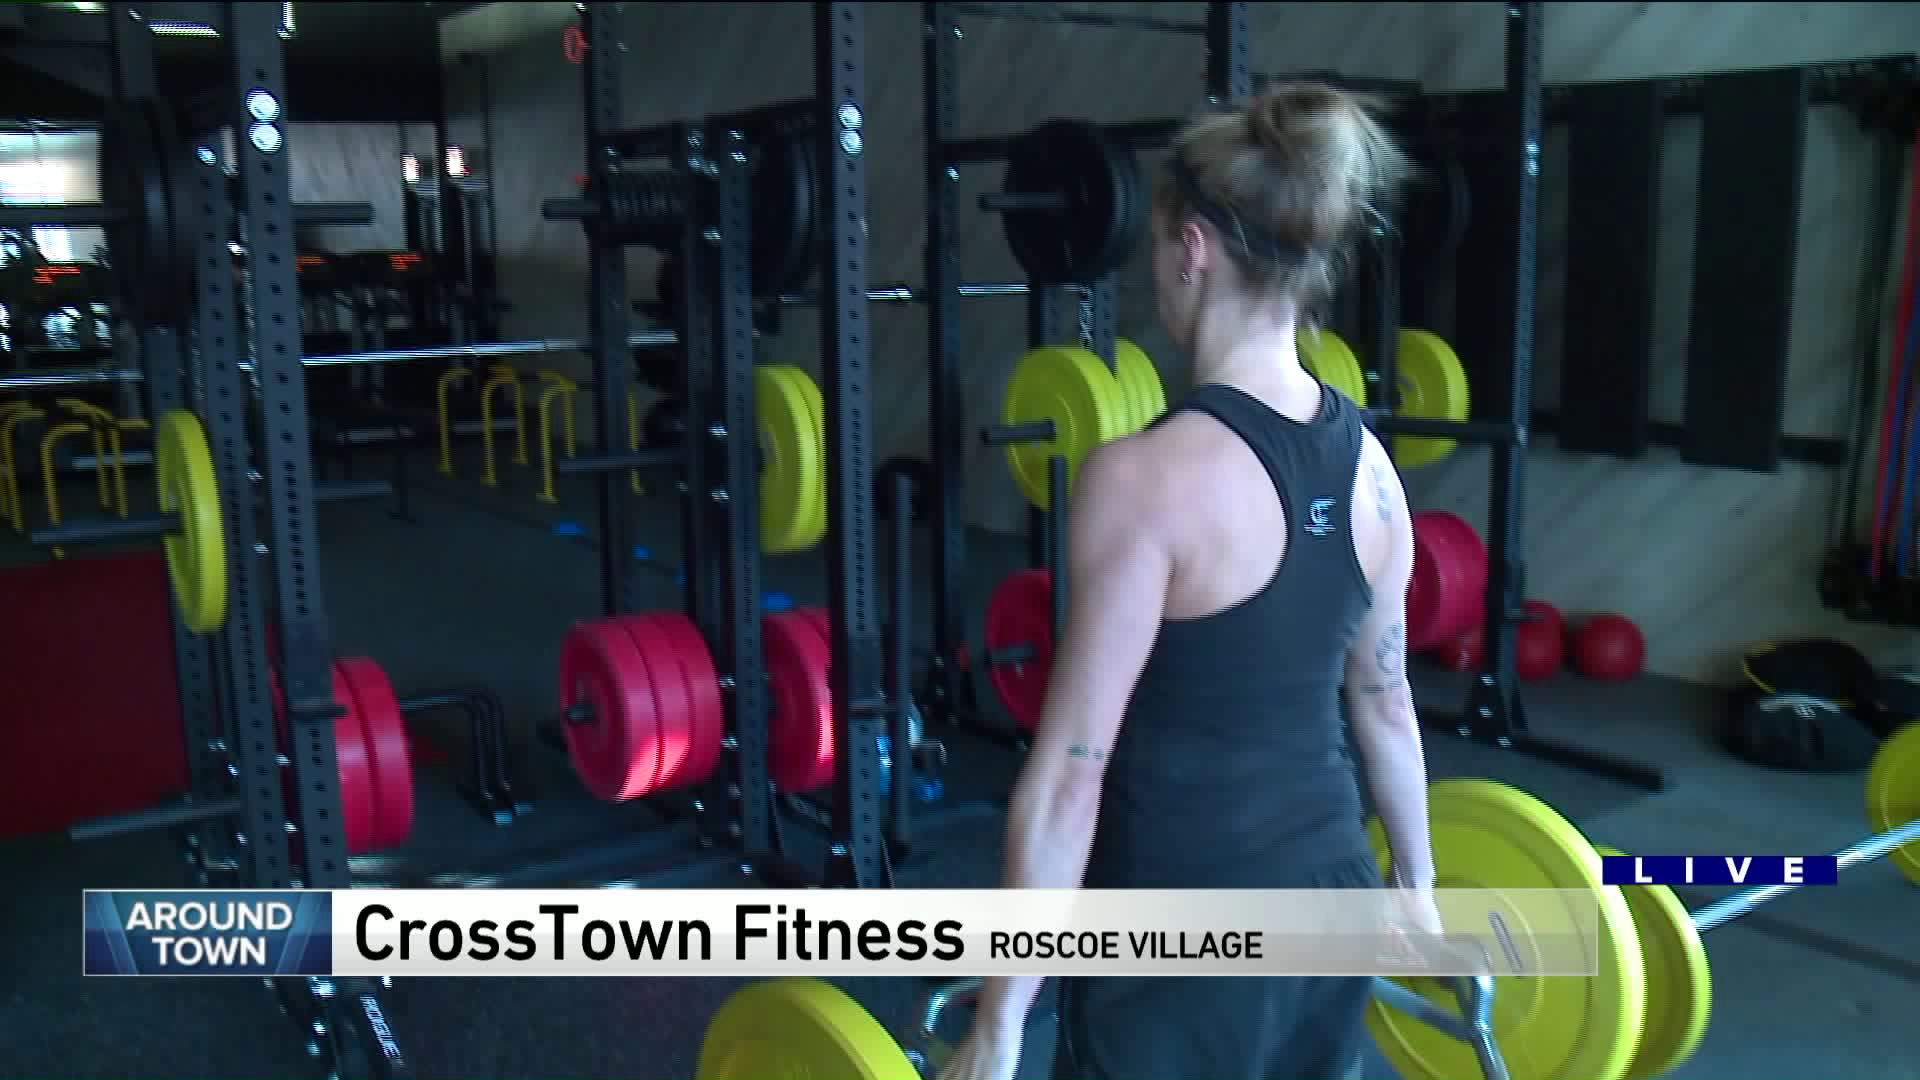 Around Town checks out CrossTown Fitness in Roscoe Village